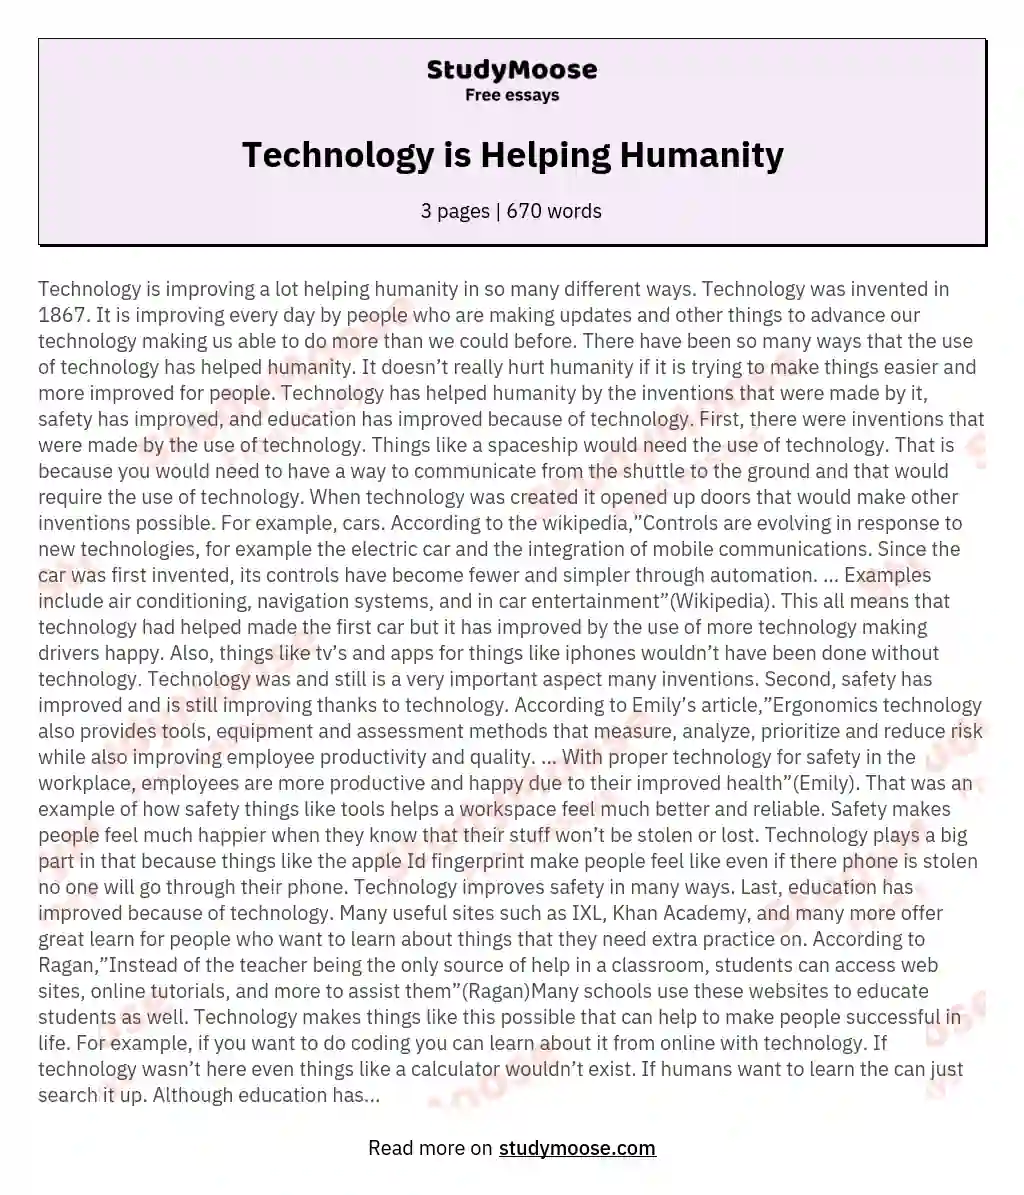 Technology is Helping Humanity essay